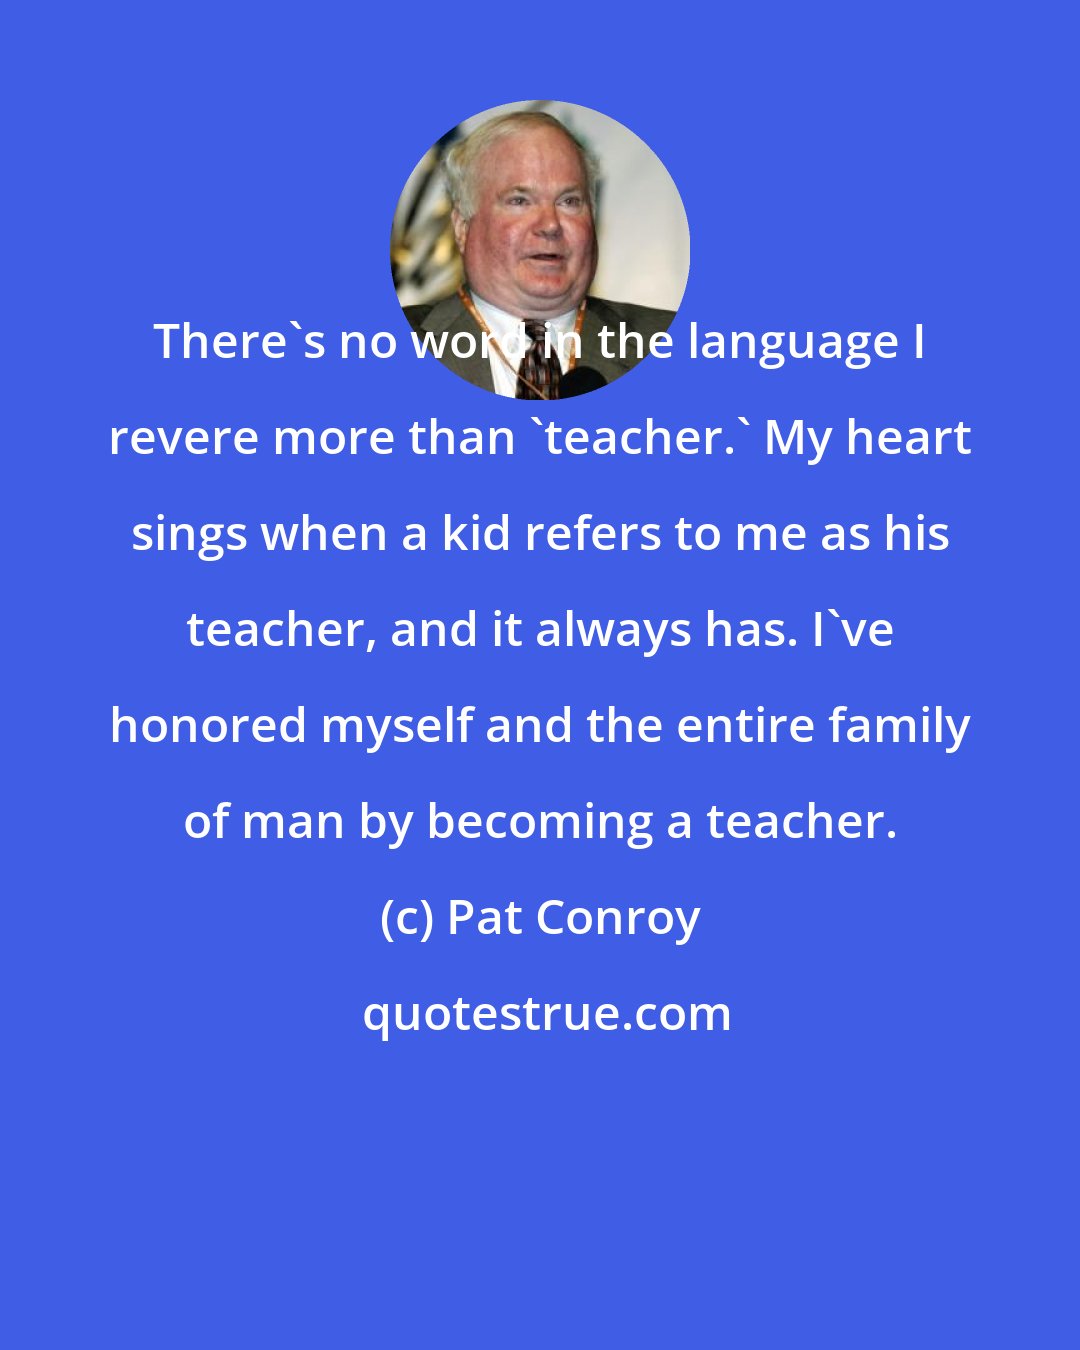 Pat Conroy: There's no word in the language I revere more than 'teacher.' My heart sings when a kid refers to me as his teacher, and it always has. I've honored myself and the entire family of man by becoming a teacher.